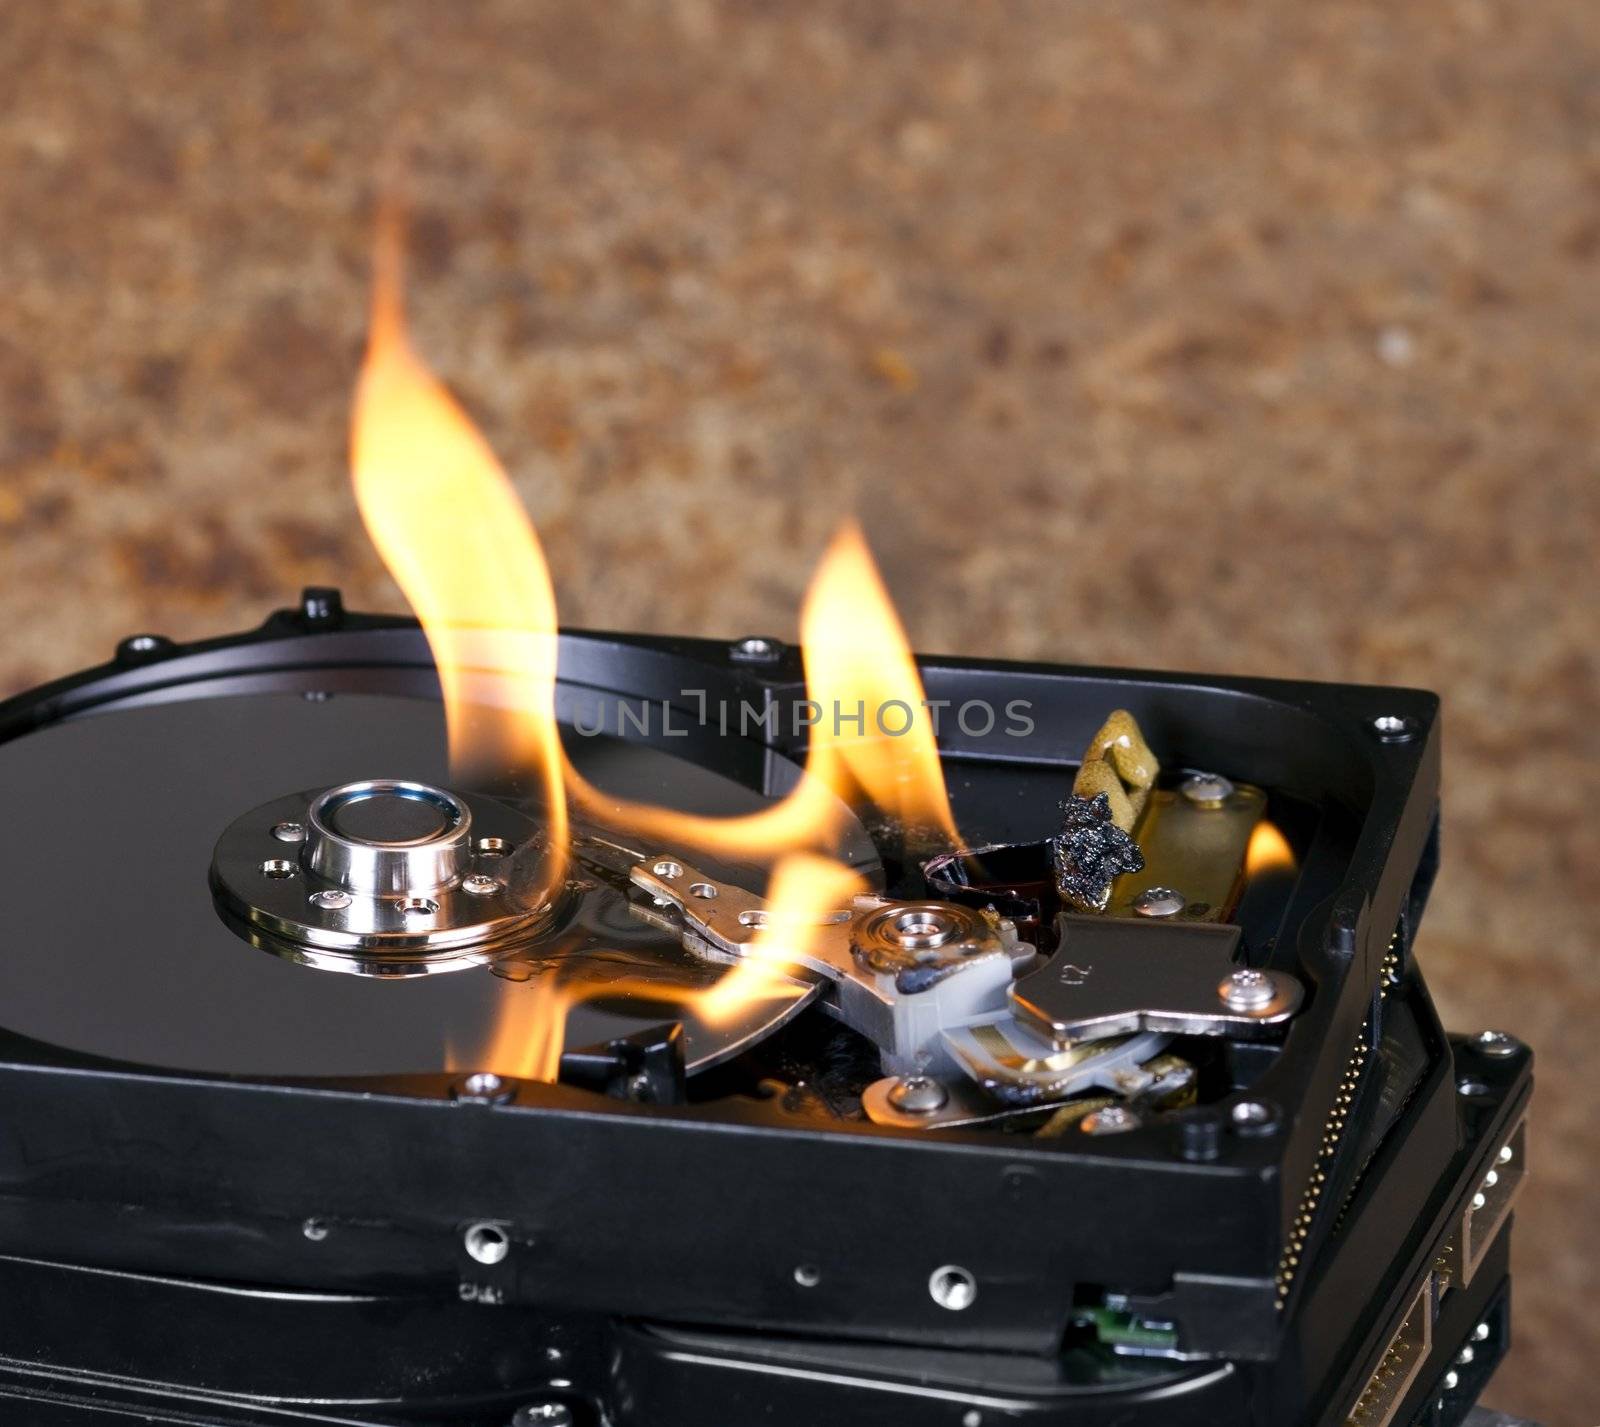 Stack of burning hard drives in close up shot. Nice flames on the drive. Rusty background